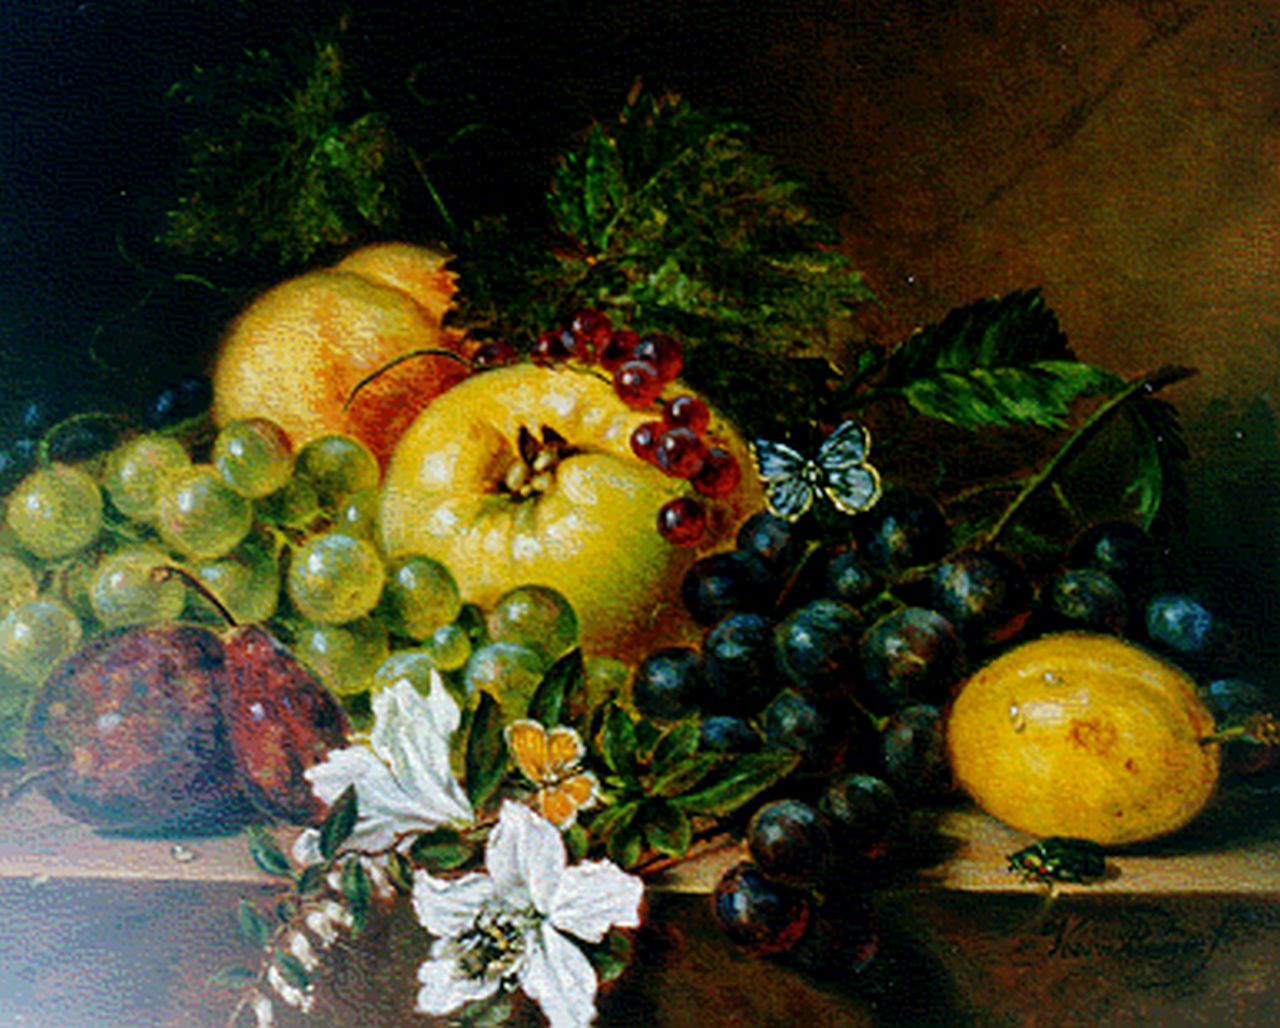 Voorn Boers S.T.  | Sebastiaan Theodorus Voorn Boers, A still life with grapes, prunes, flowers and a butterfly, oil on panel 23.6 x 30.0 cm, signed l.r.